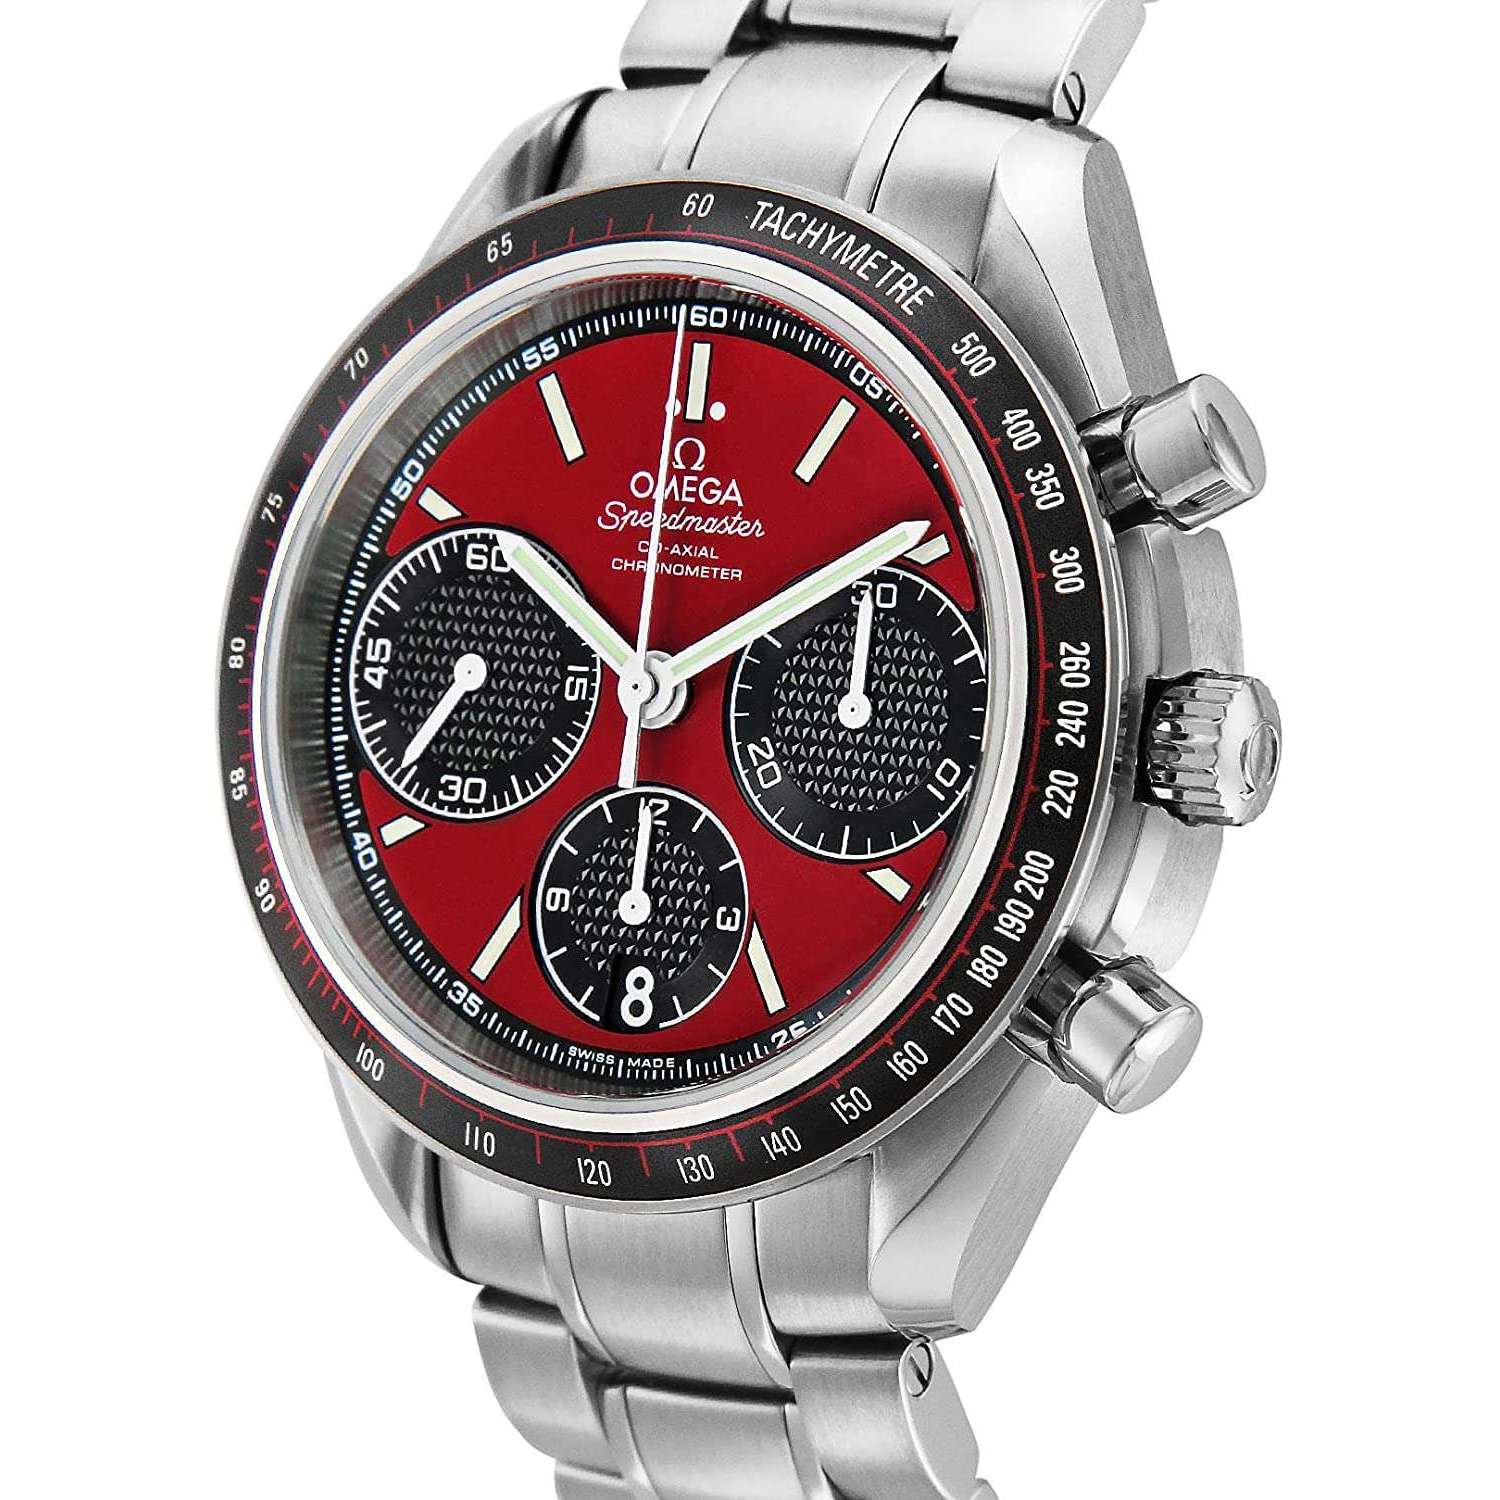 ROOK JAPAN:OMEGA SPEEDMASTER RACING CO-AXIAL CHRONOMETER 40 MM MEN WATCH 326.30.40.50.11.001,Luxury Watch,Omega